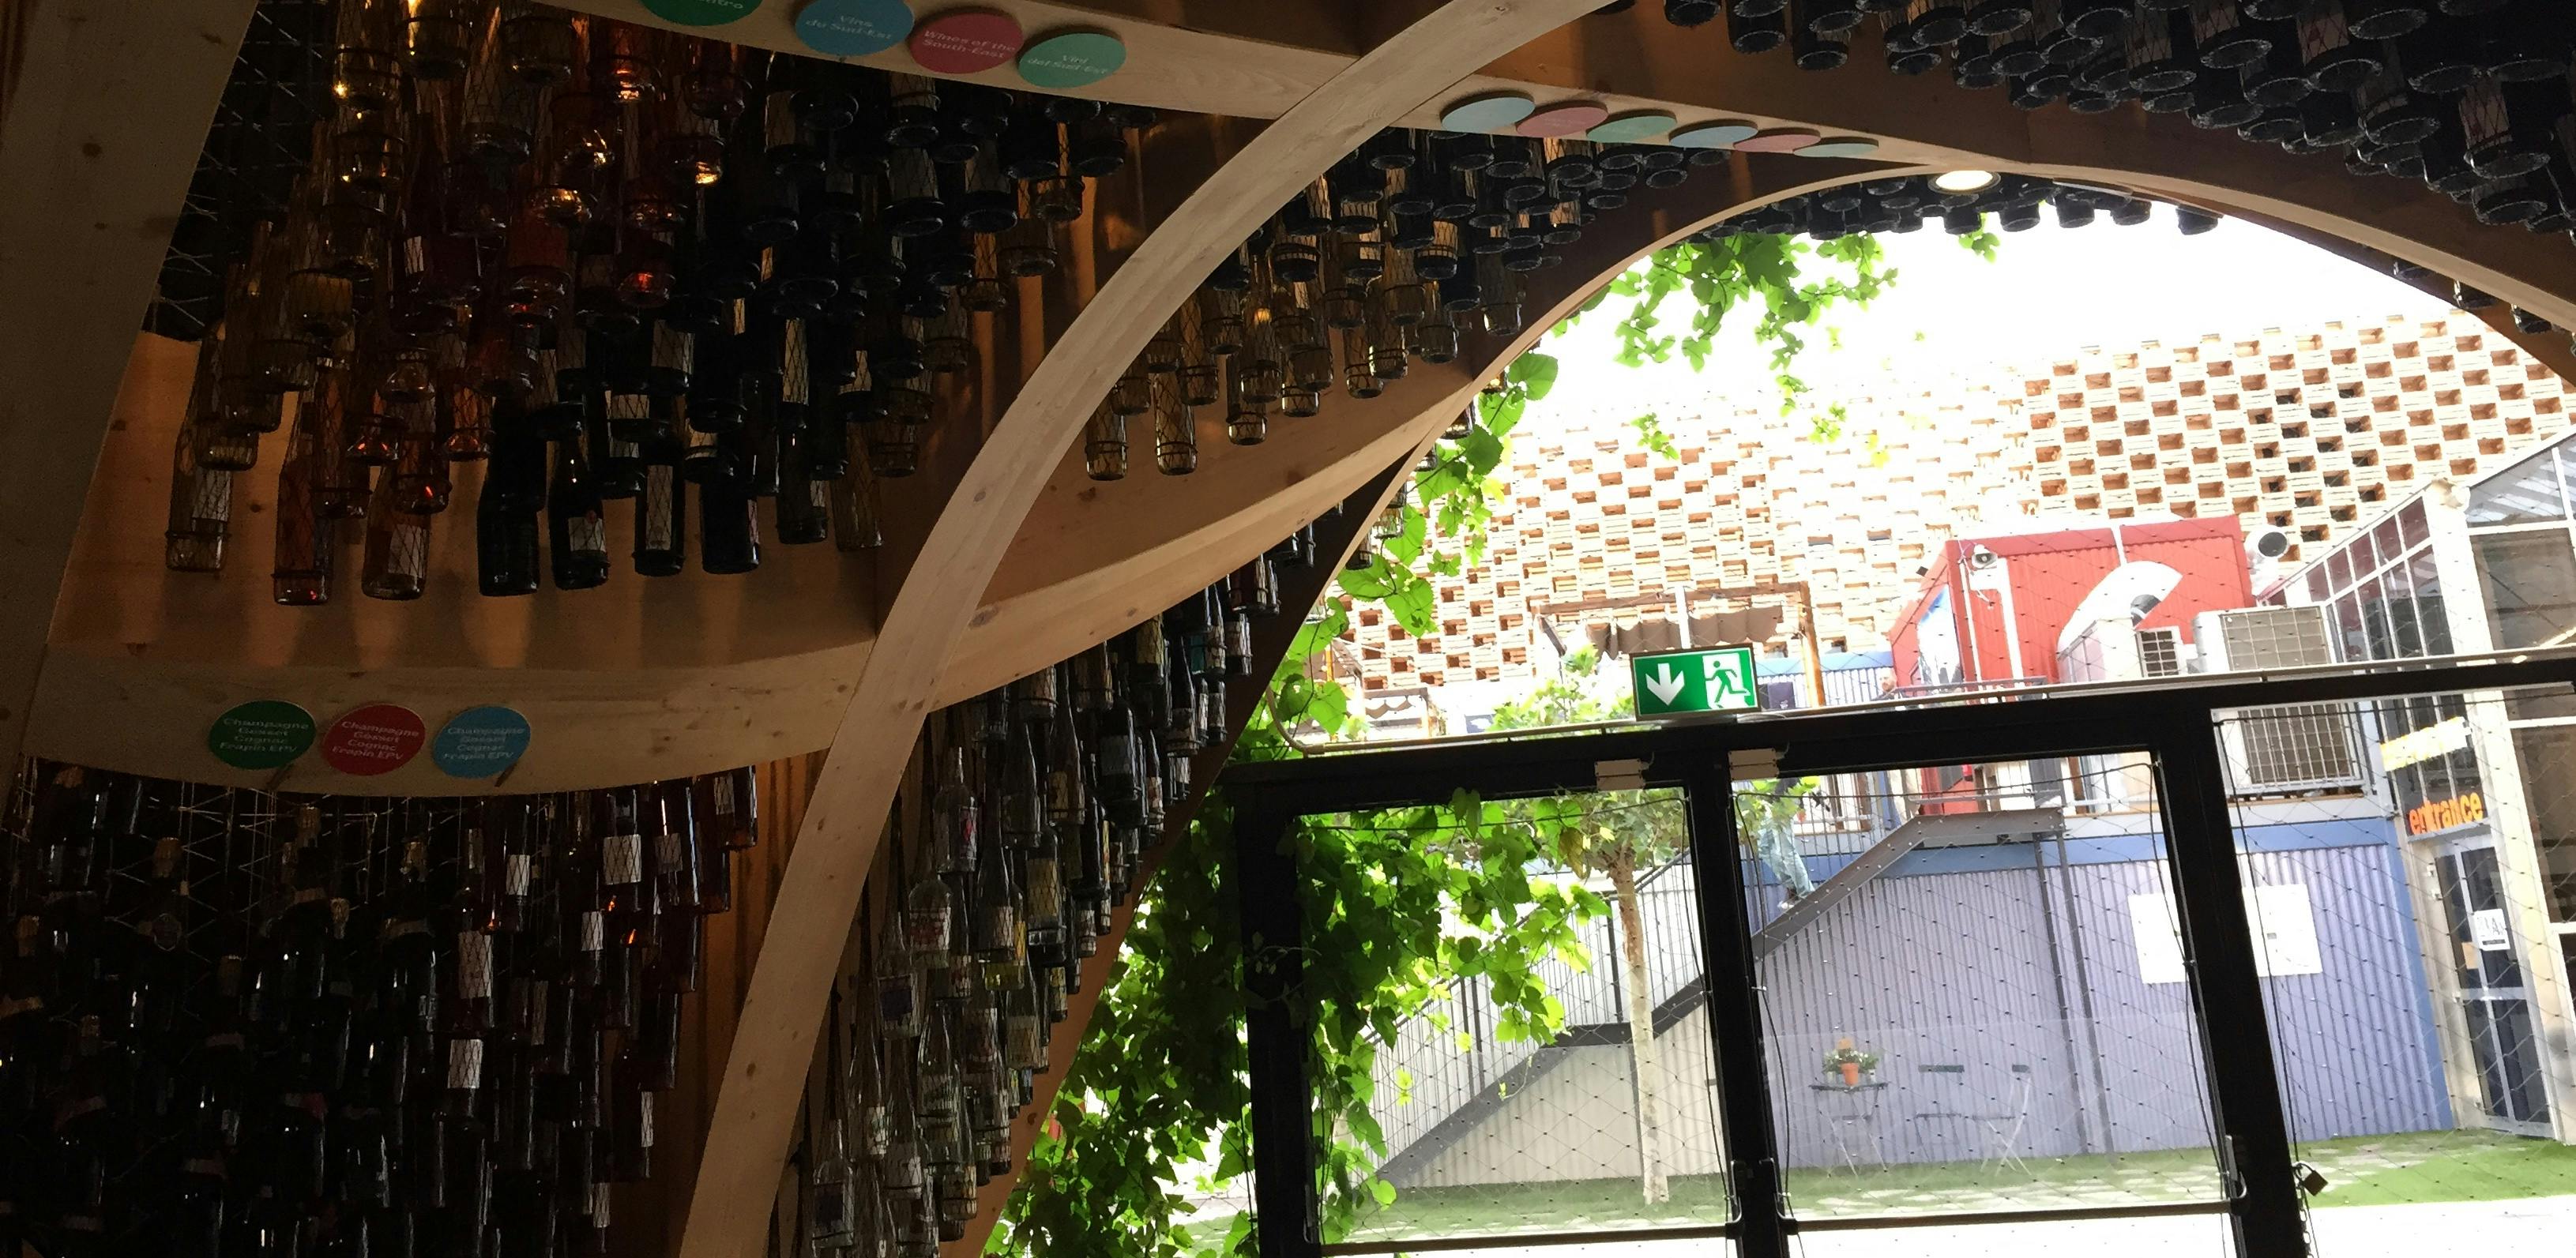 Bottles hanging from ceiling at world expo